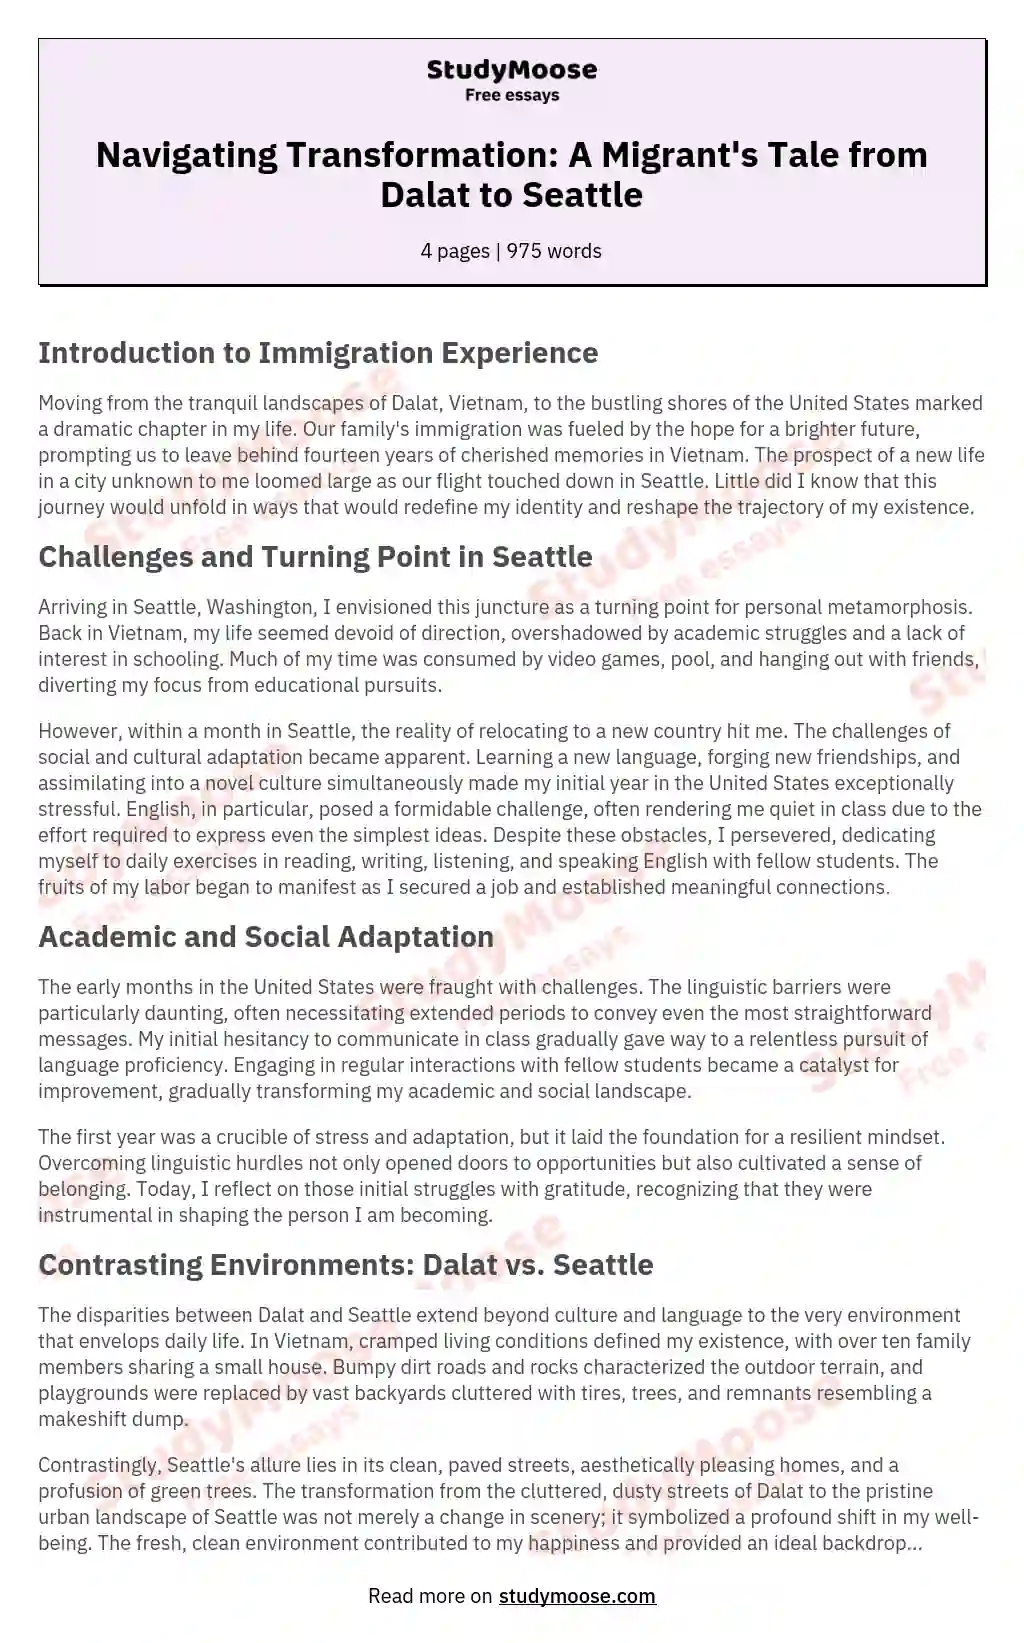 Navigating Transformation: A Migrant's Tale from Dalat to Seattle essay